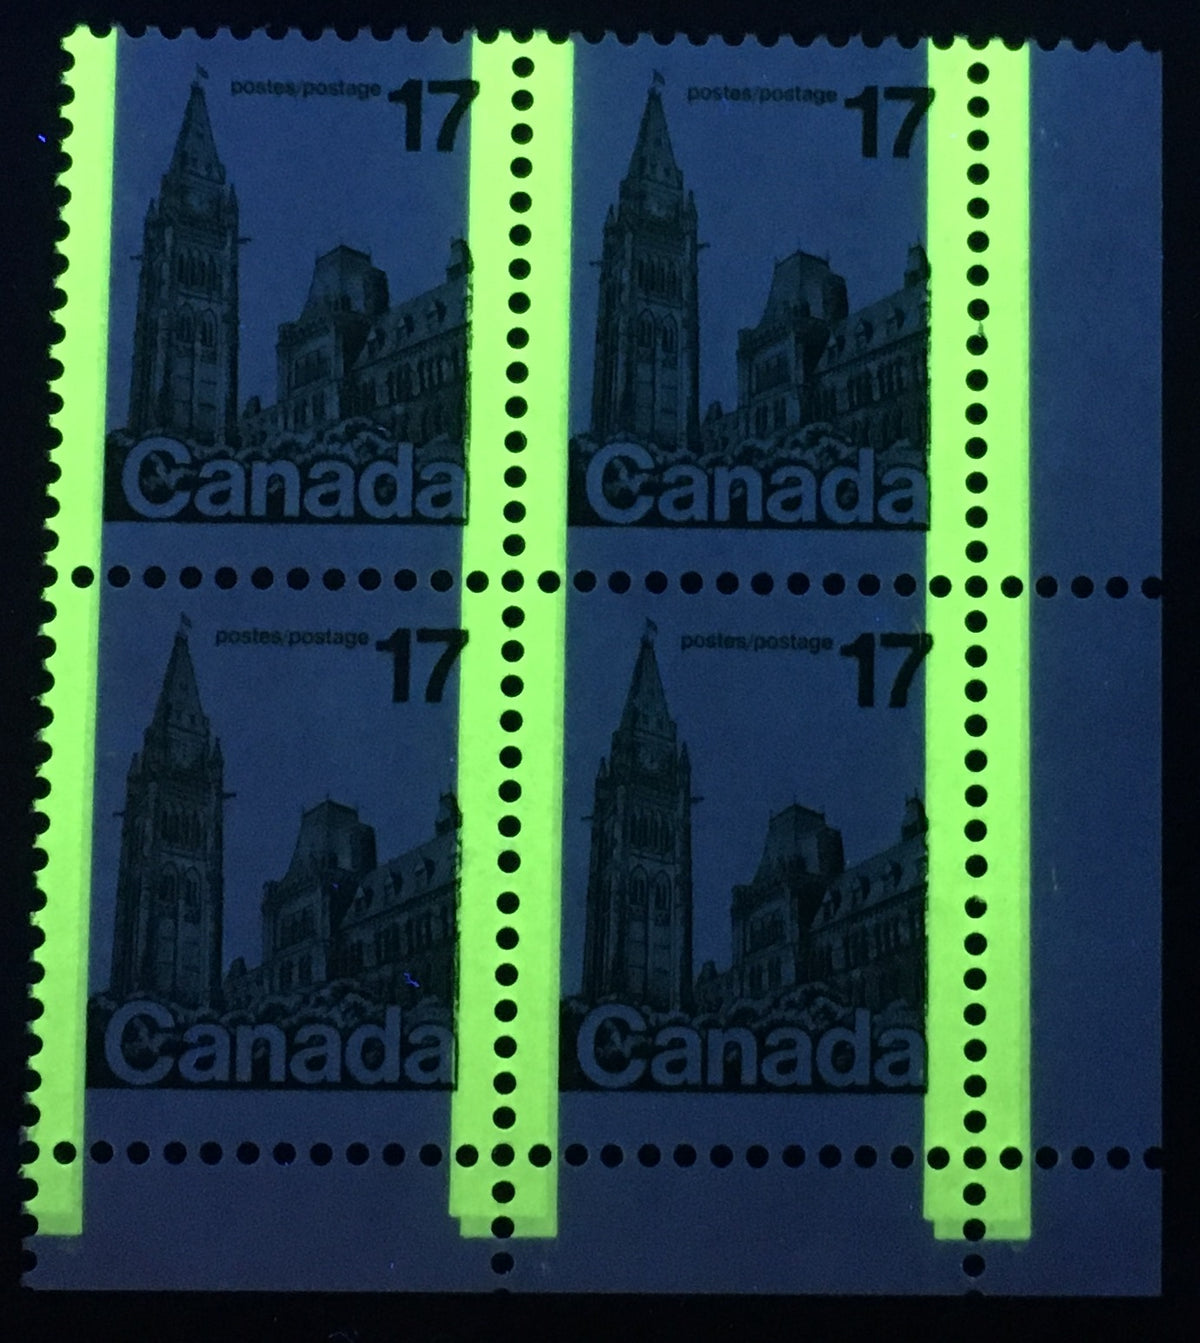 0790CA2007 - Canada #790 - Mint Corner Block of 4, Double Tagging Variety